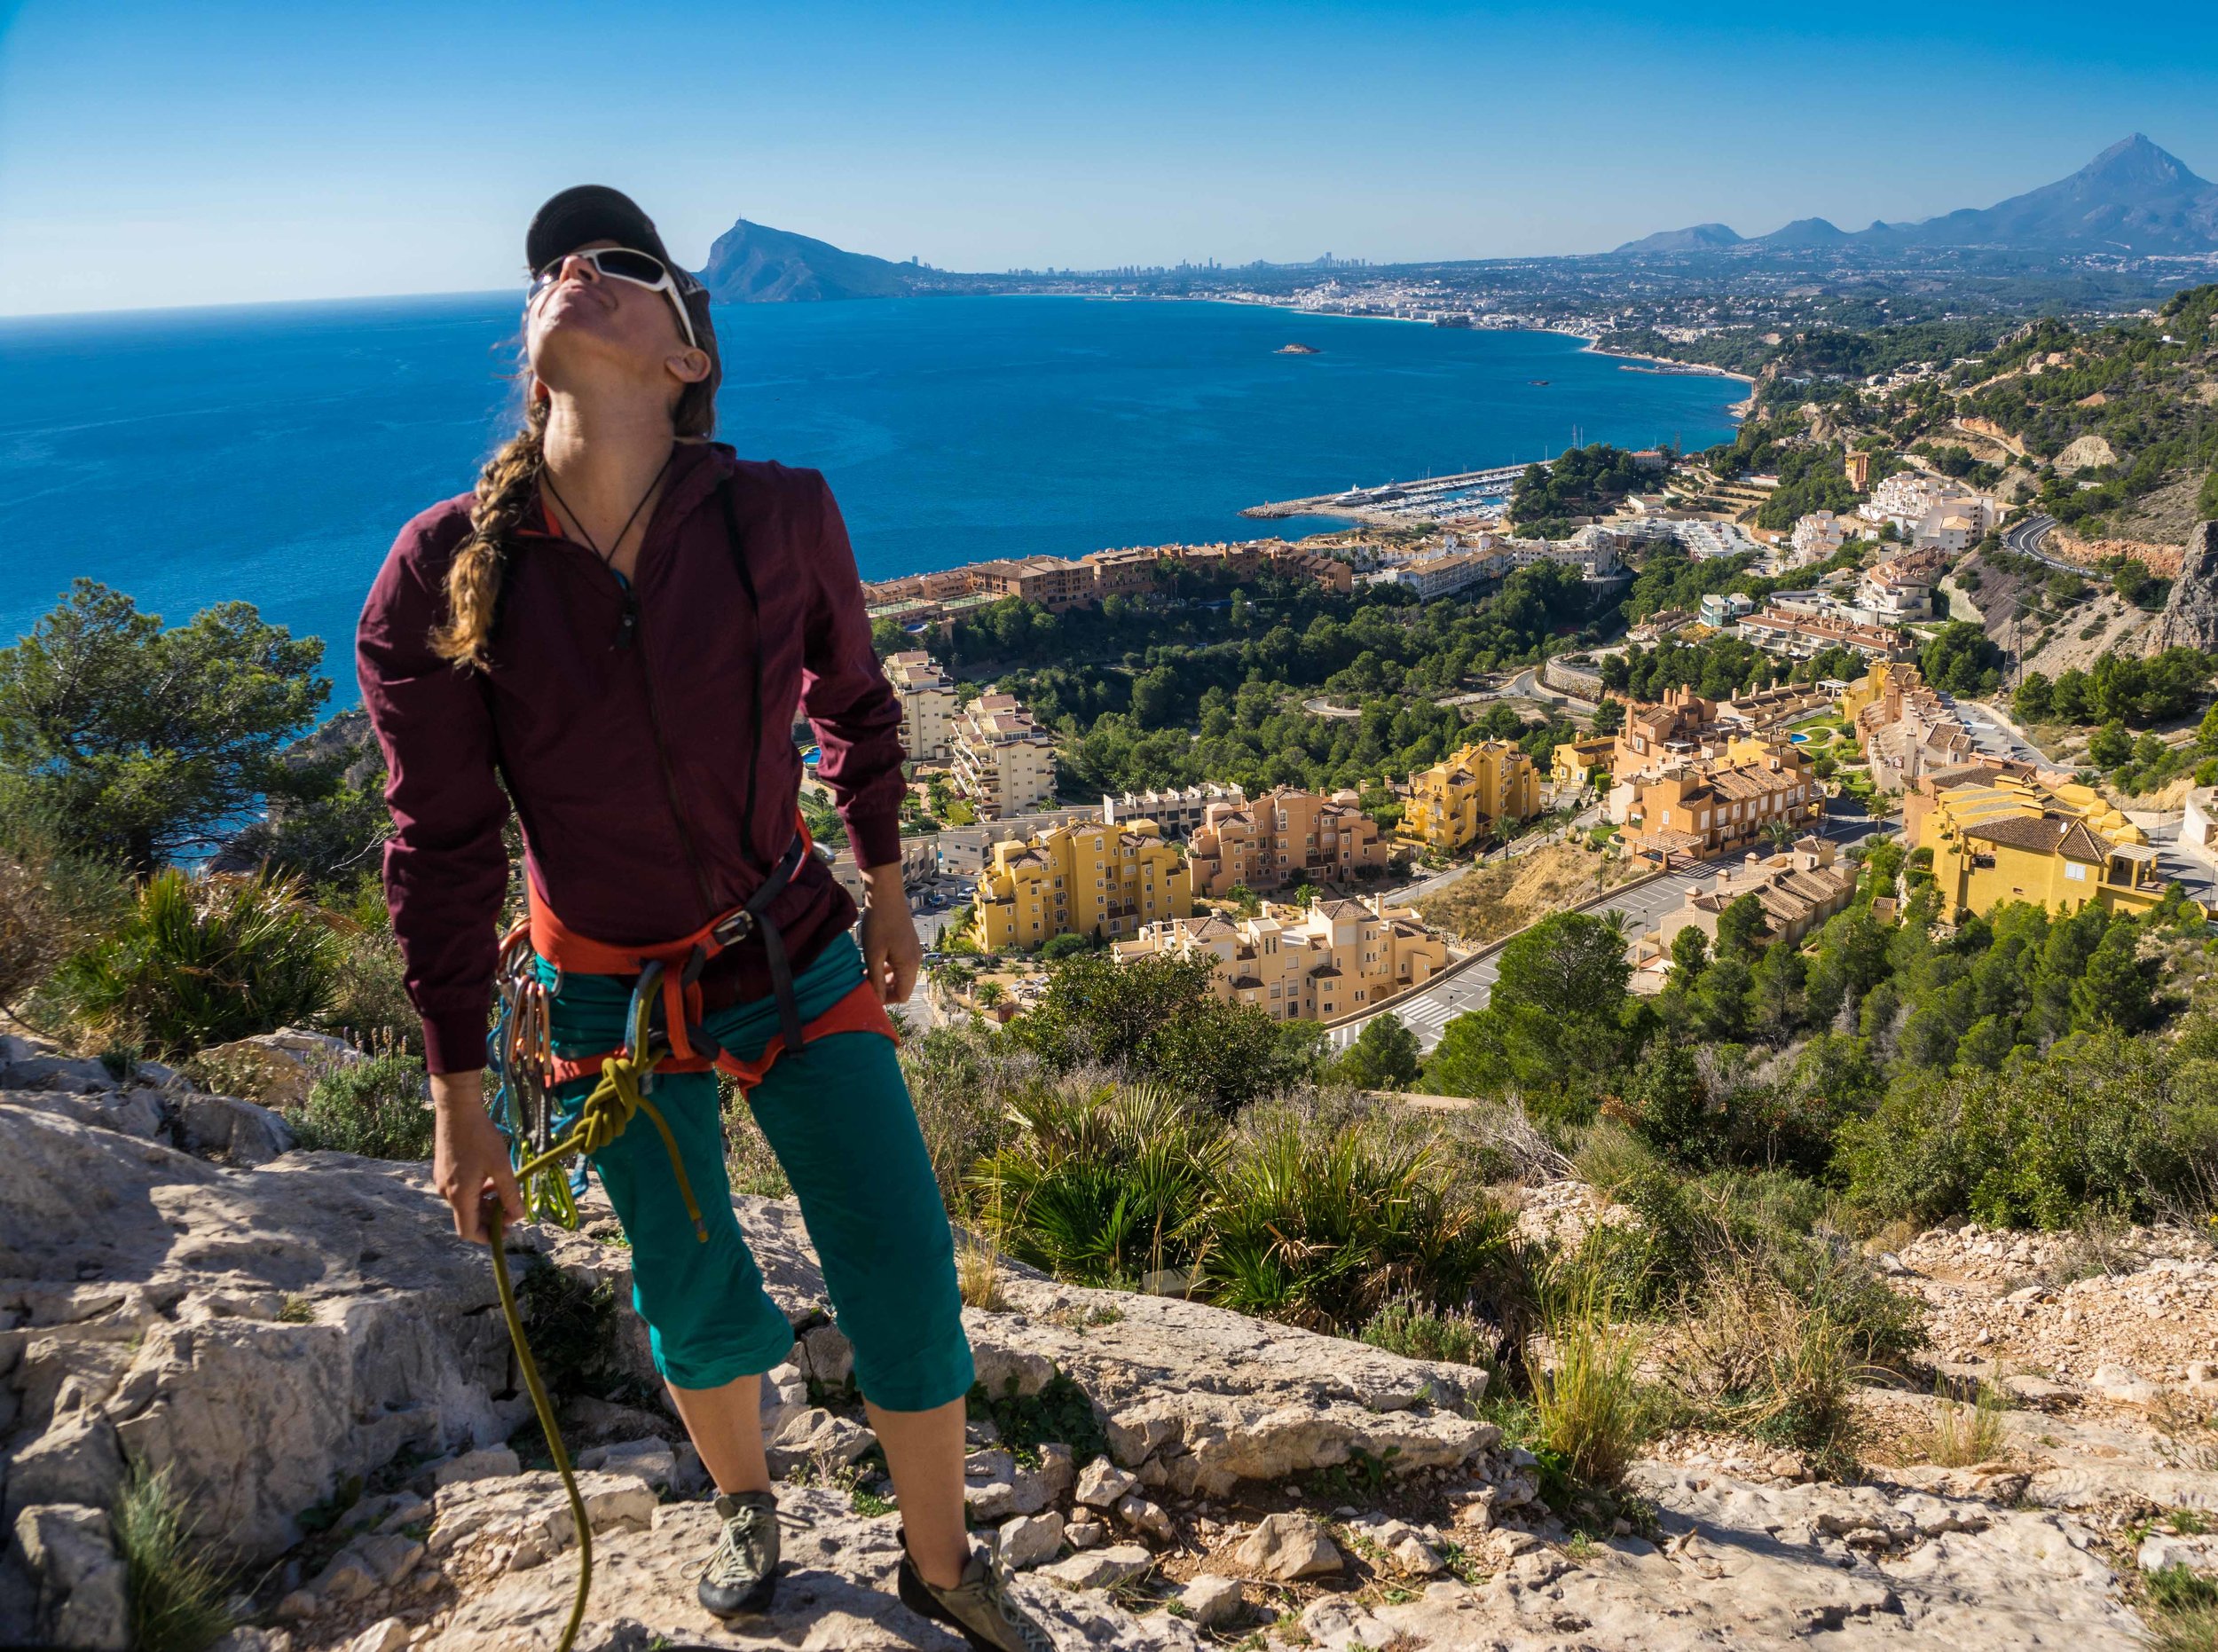 Scoping out a rock climb in the Costa Blanca